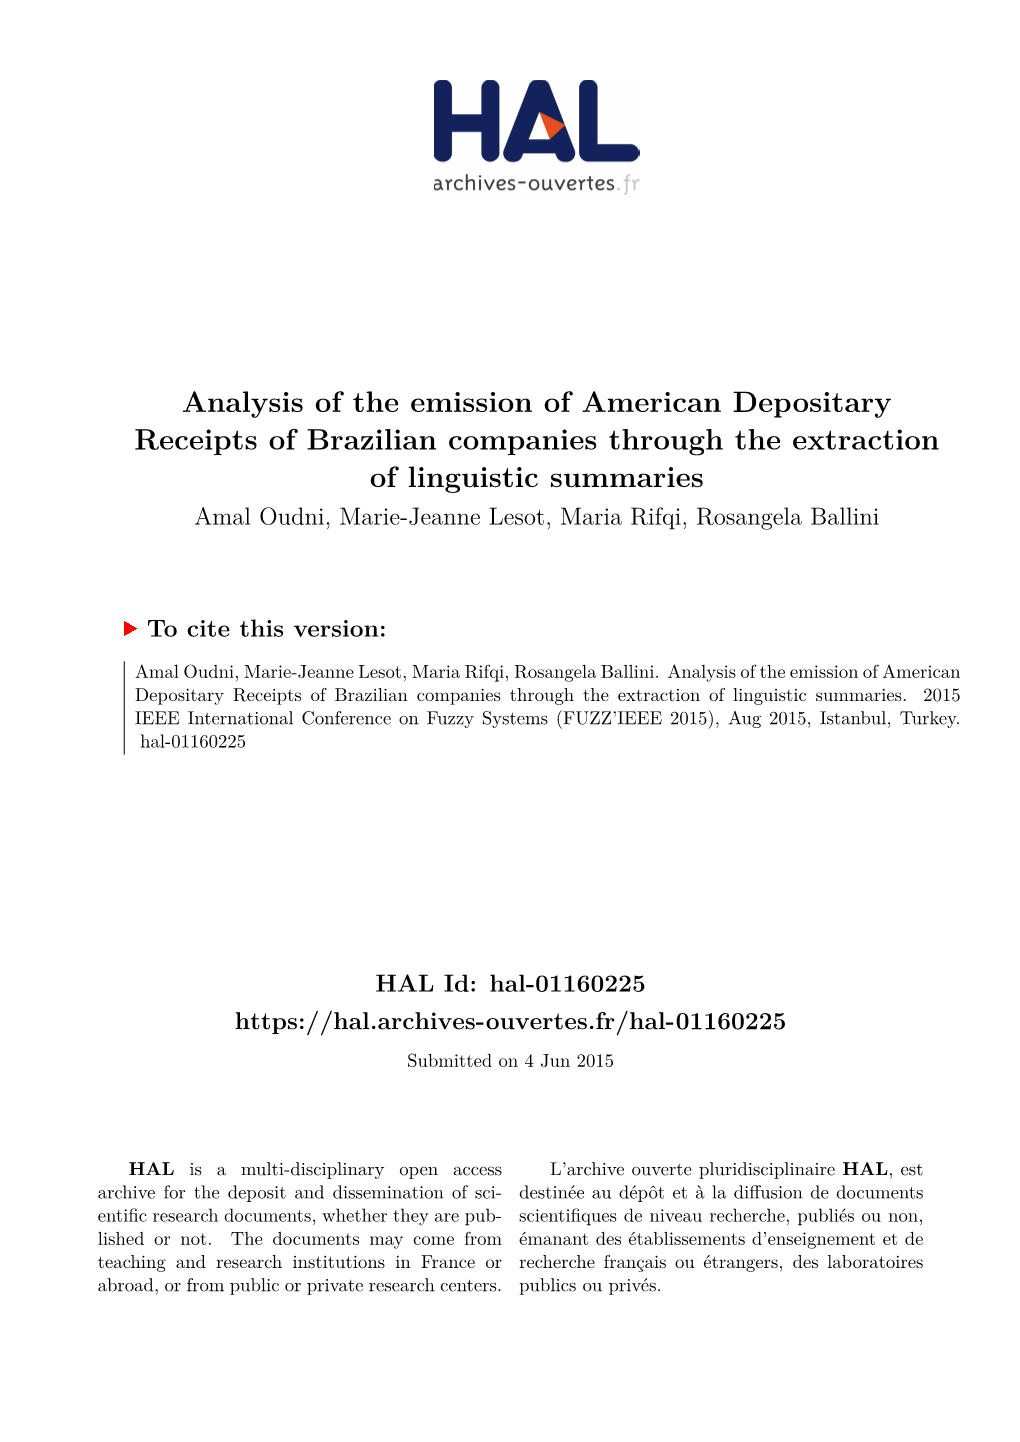 Analysis of the Emission of American Depositary Receipts of Brazilian